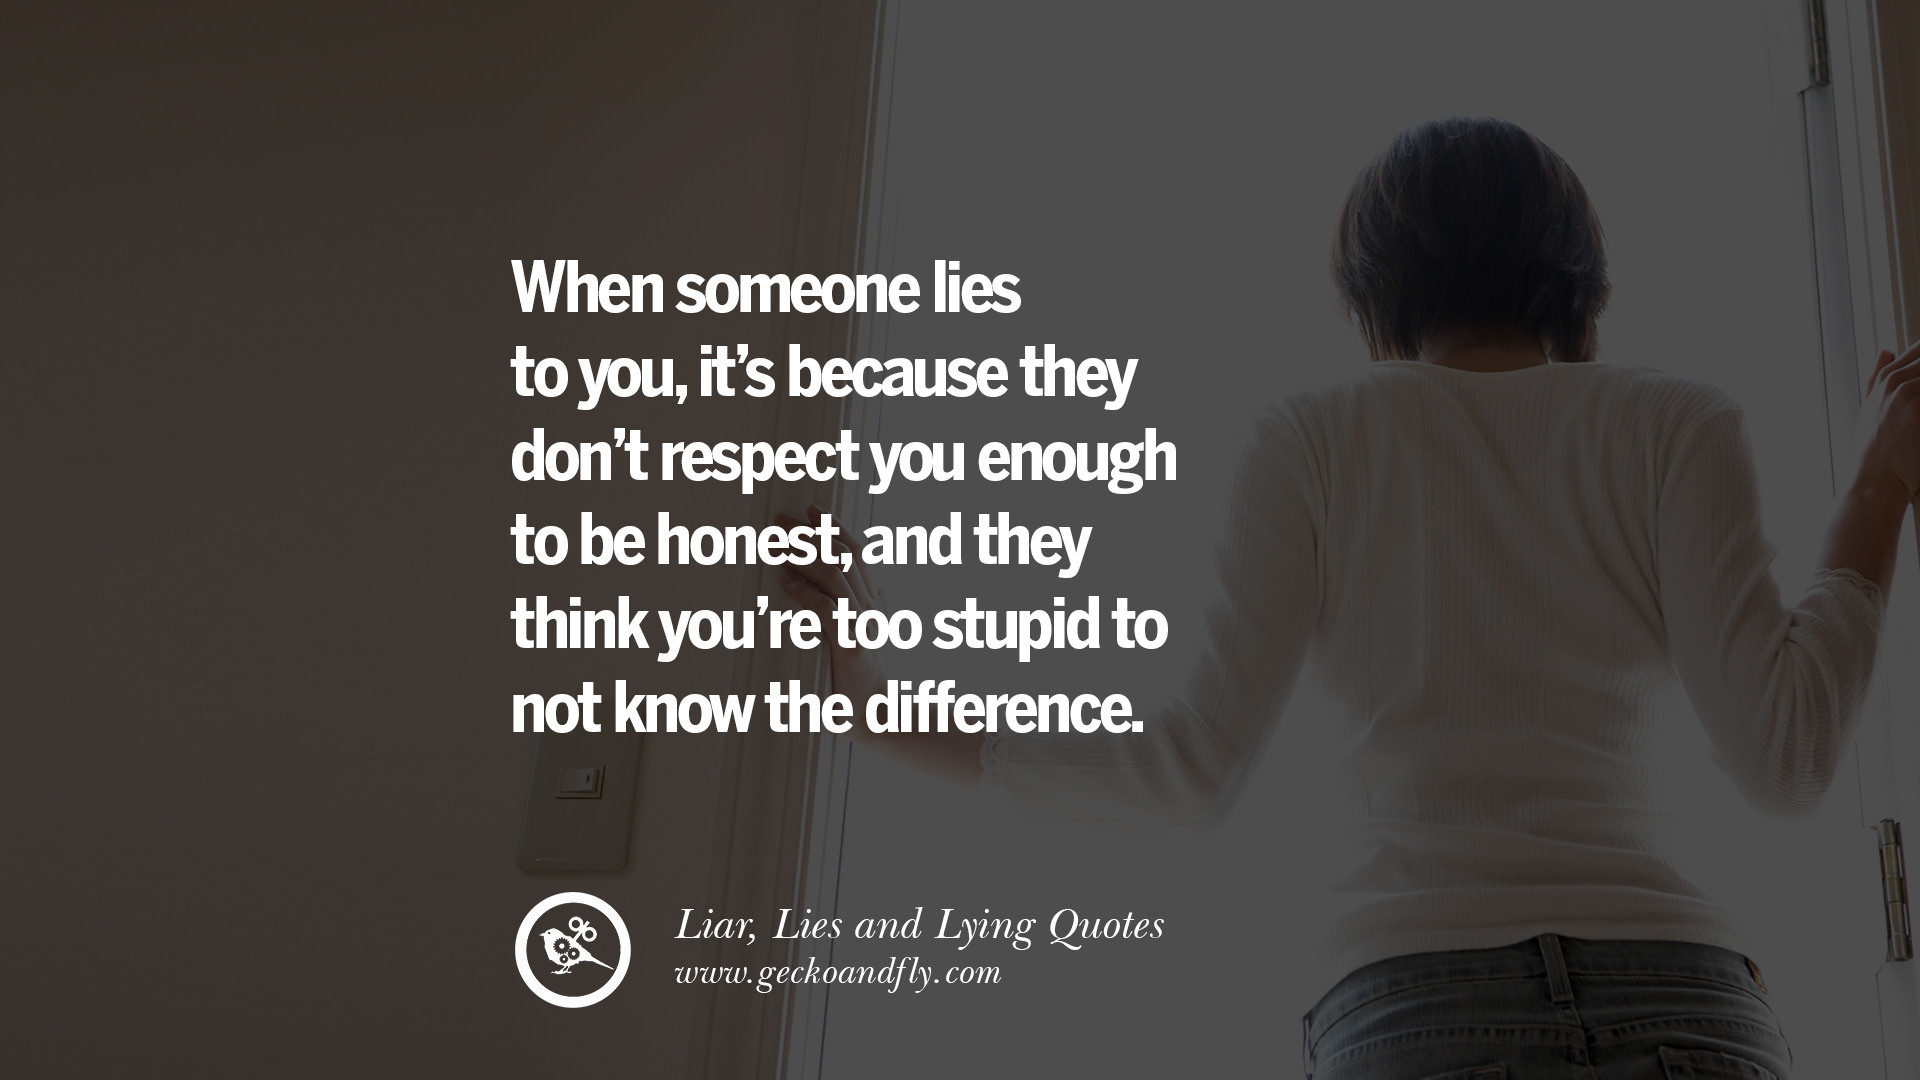 Quotes About Lies In A Relationship
 60 Quotes About Liar Lies and Lying Boyfriend In A